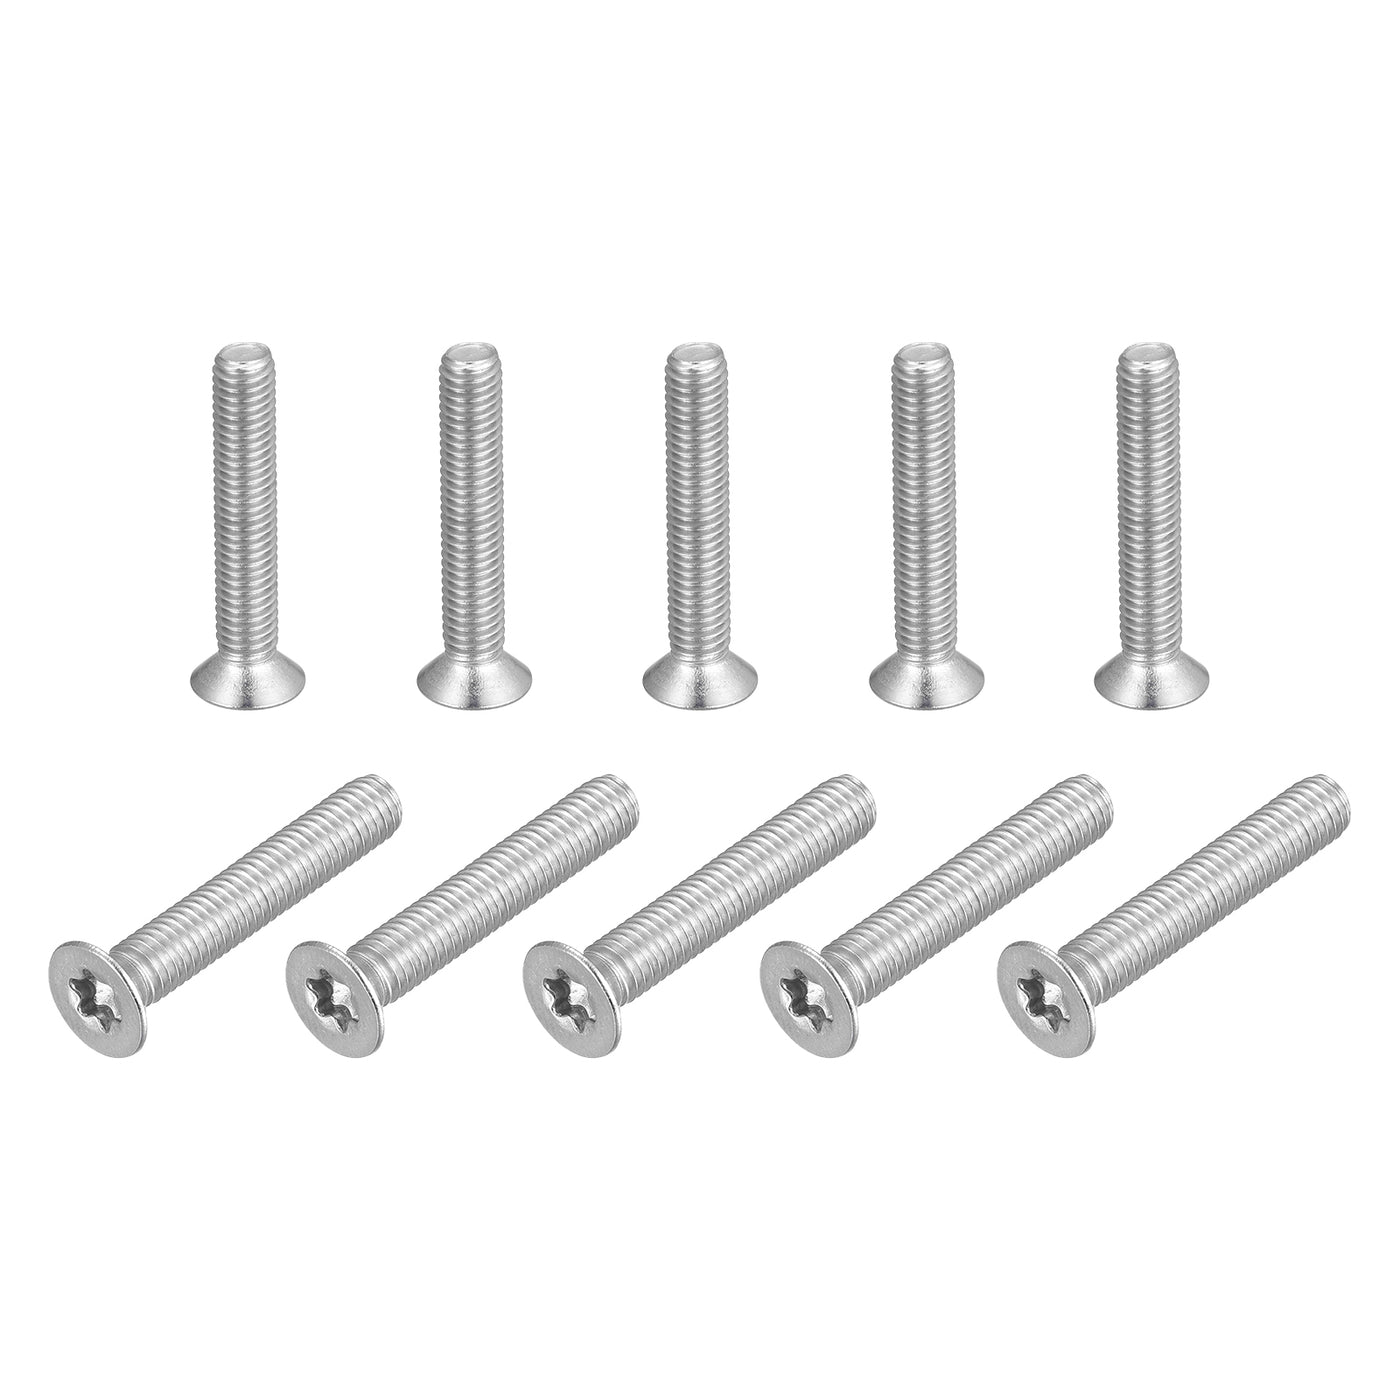 uxcell Uxcell M5x30mm Torx Security Screws, 10pcs 316 Stainless Steel Countersunk Head Screw